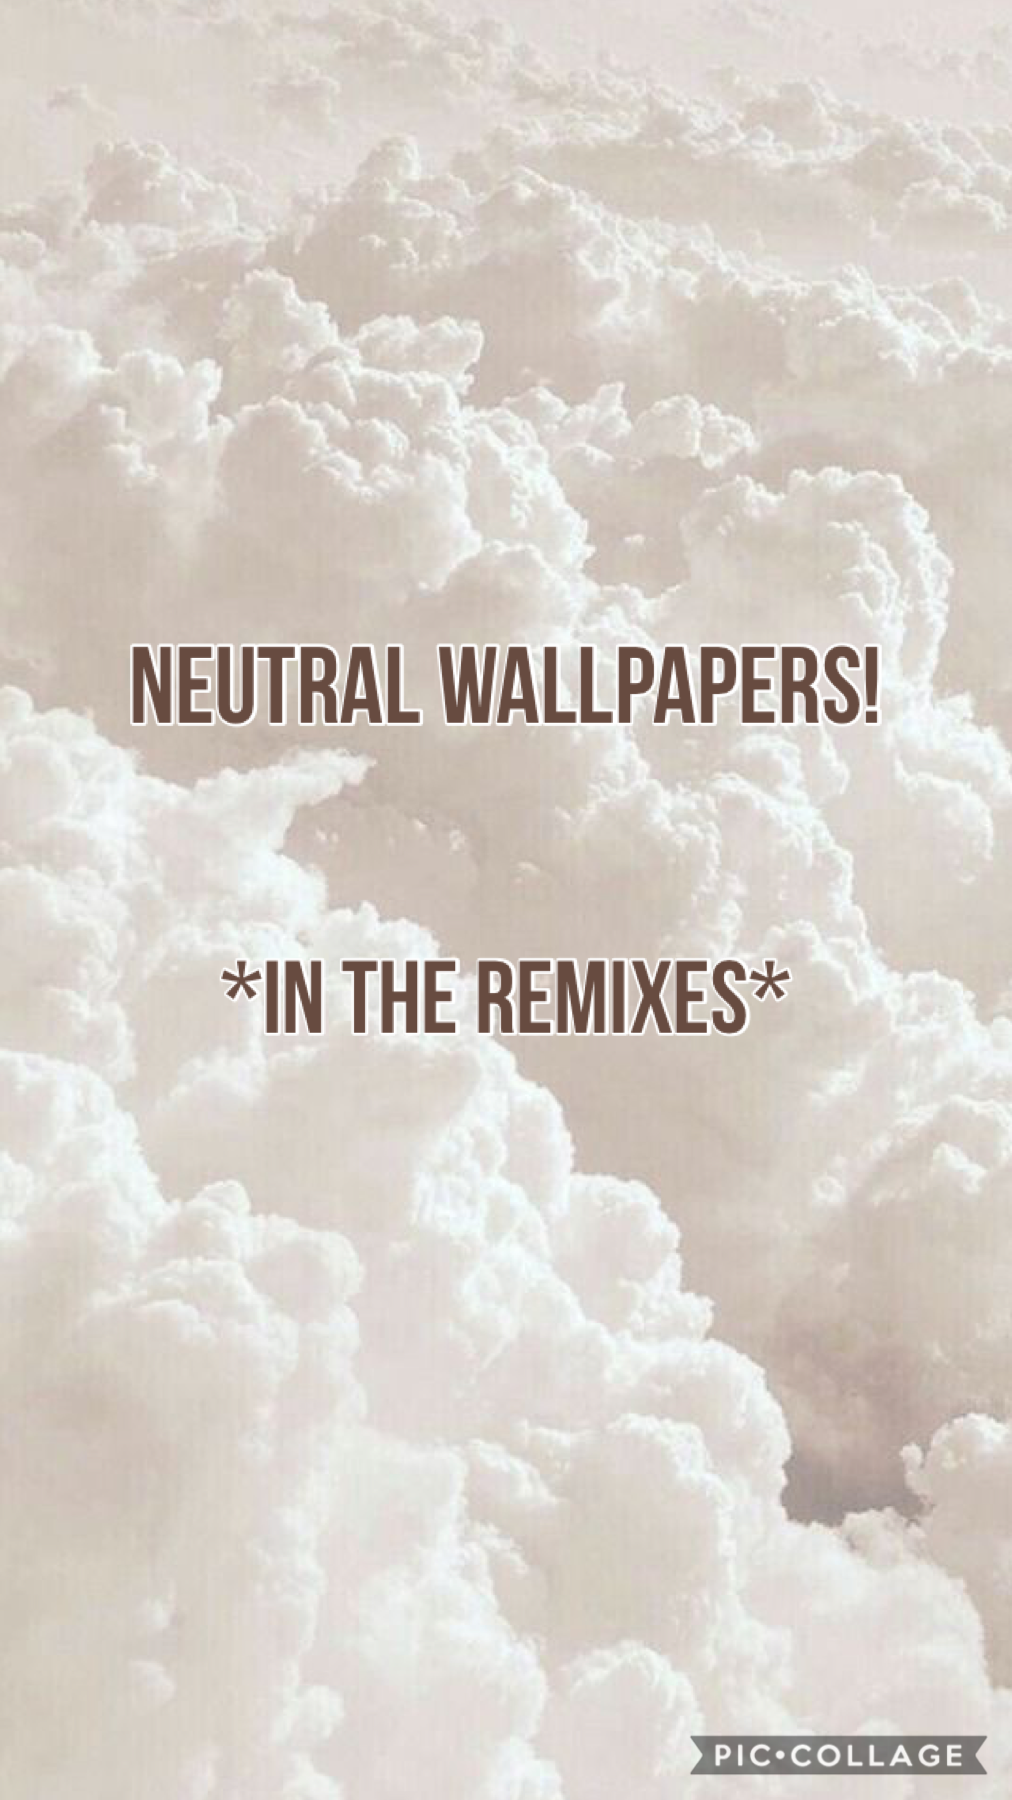 Neutral wallpapers! Love these colors!